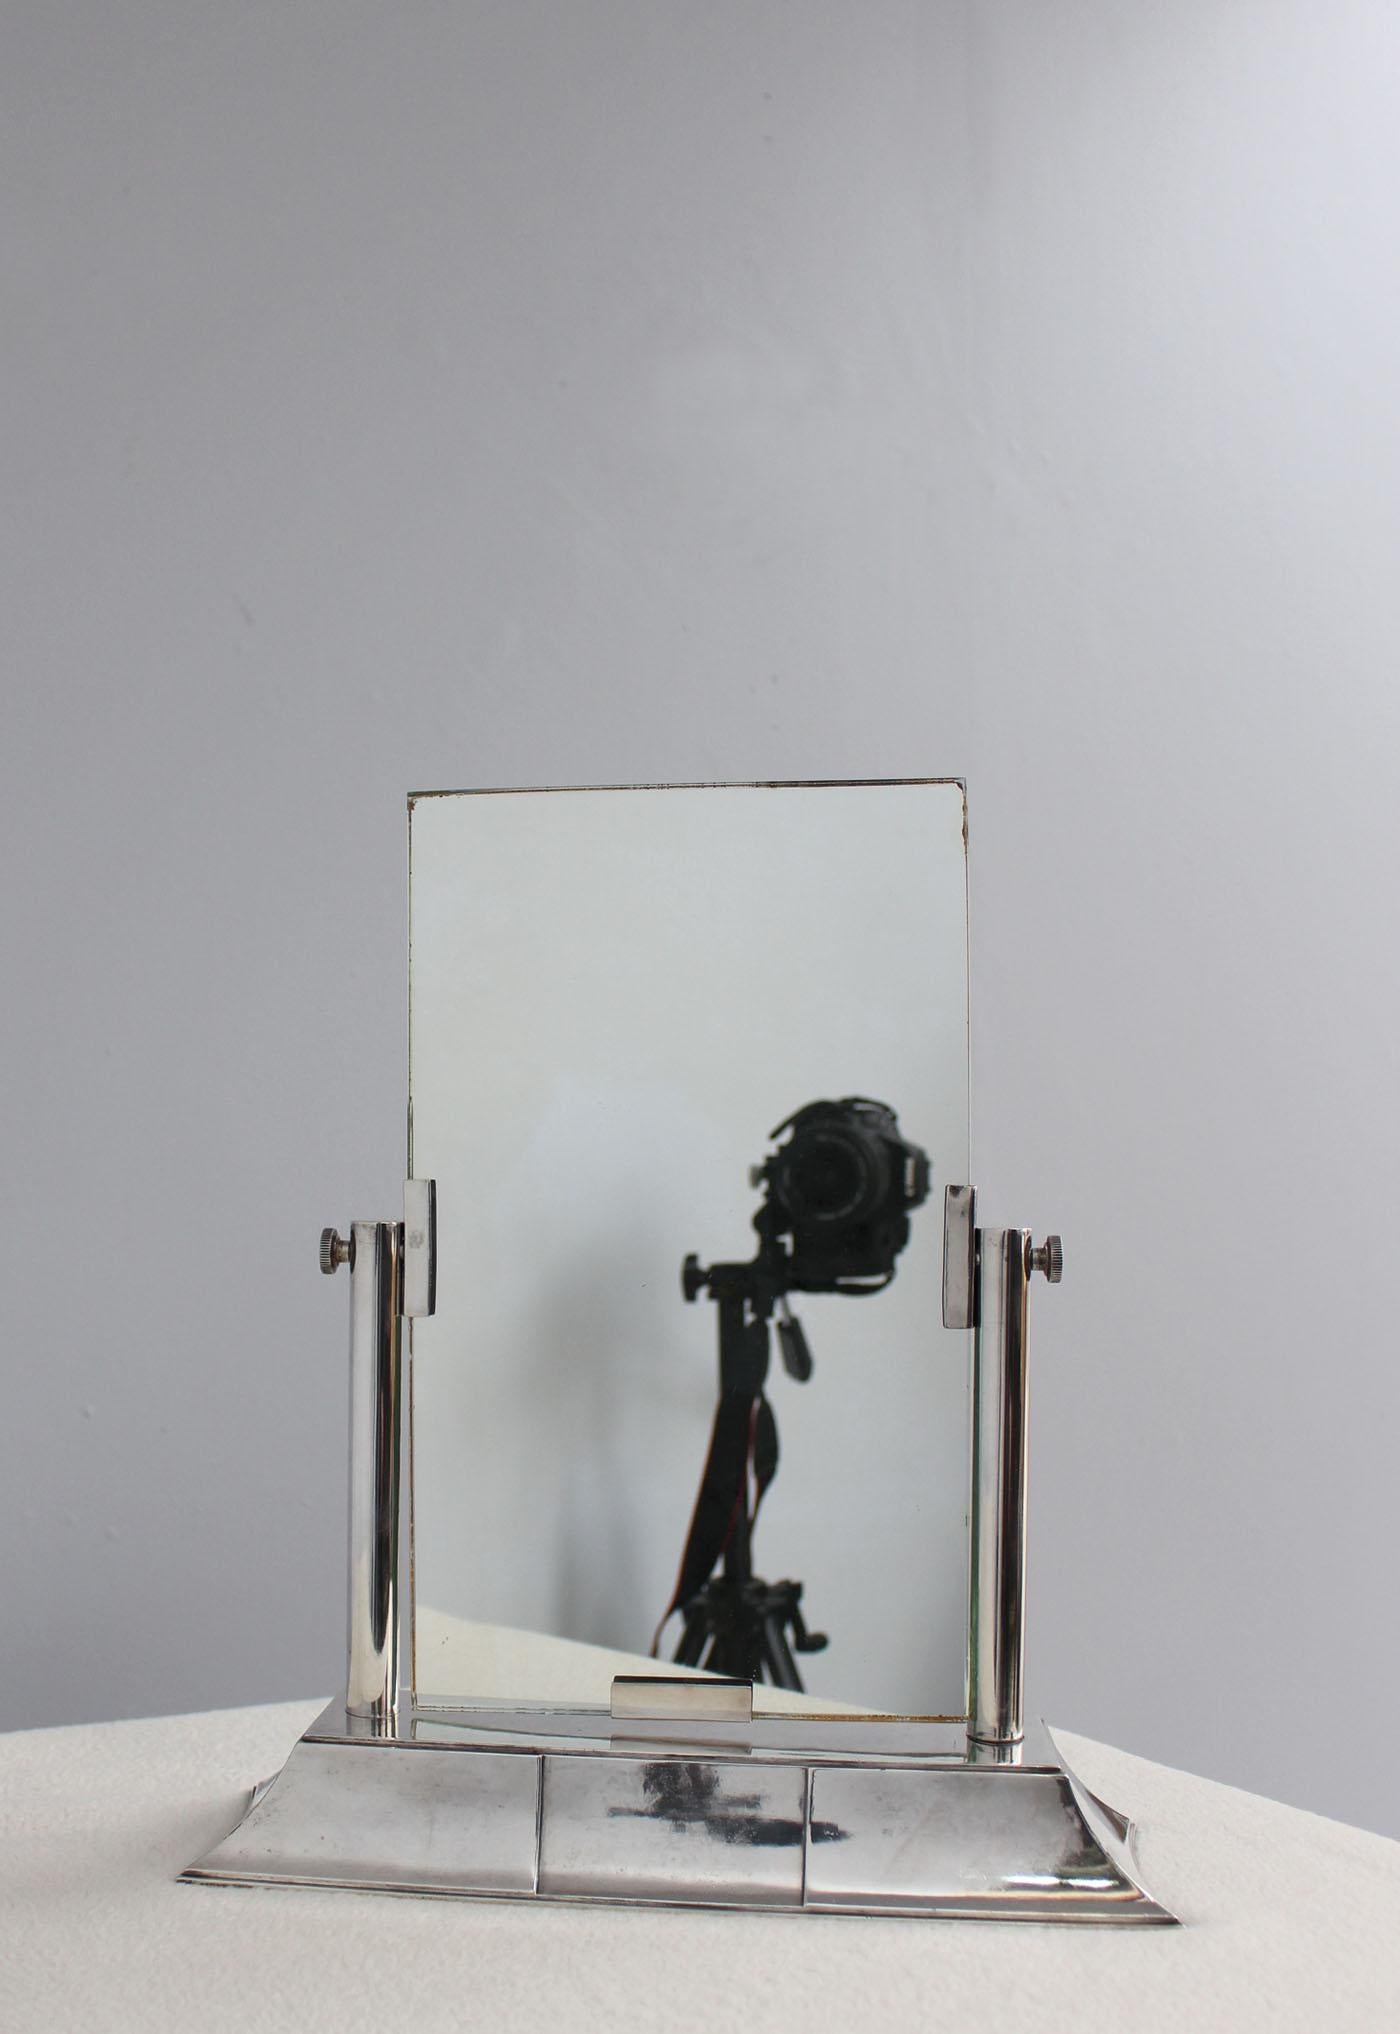 Luc Lanel (1893-1965) for Christofle (Gallia collection) - A fine French Art Deco table mirror with a pyramidal base and two poles holding a tilting mirror. 
Stamped Gallia
Bibliography : Dominique Forest - Lanel : Luc et Marjolaine - Editions